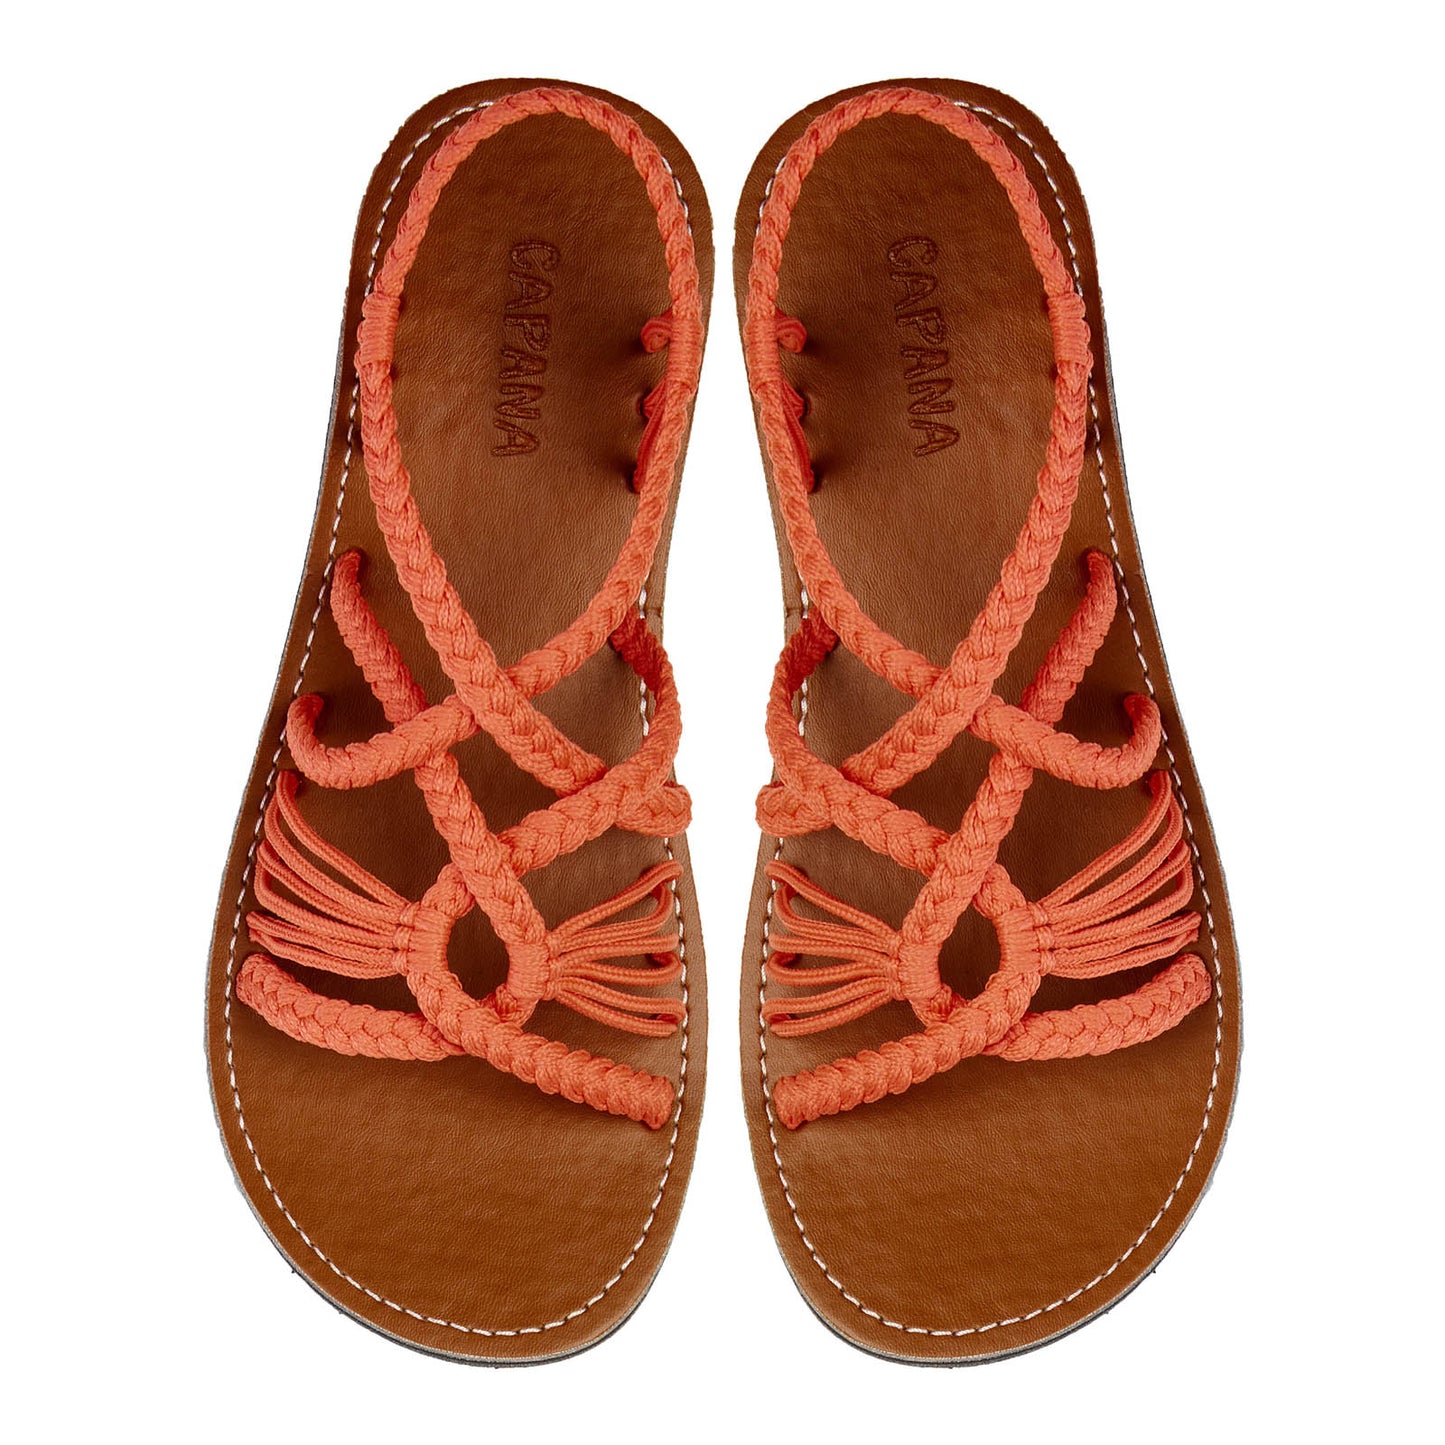 Relax Salmon Rope Sandals Coral Open toe wider design Flat Handmade sandals for women